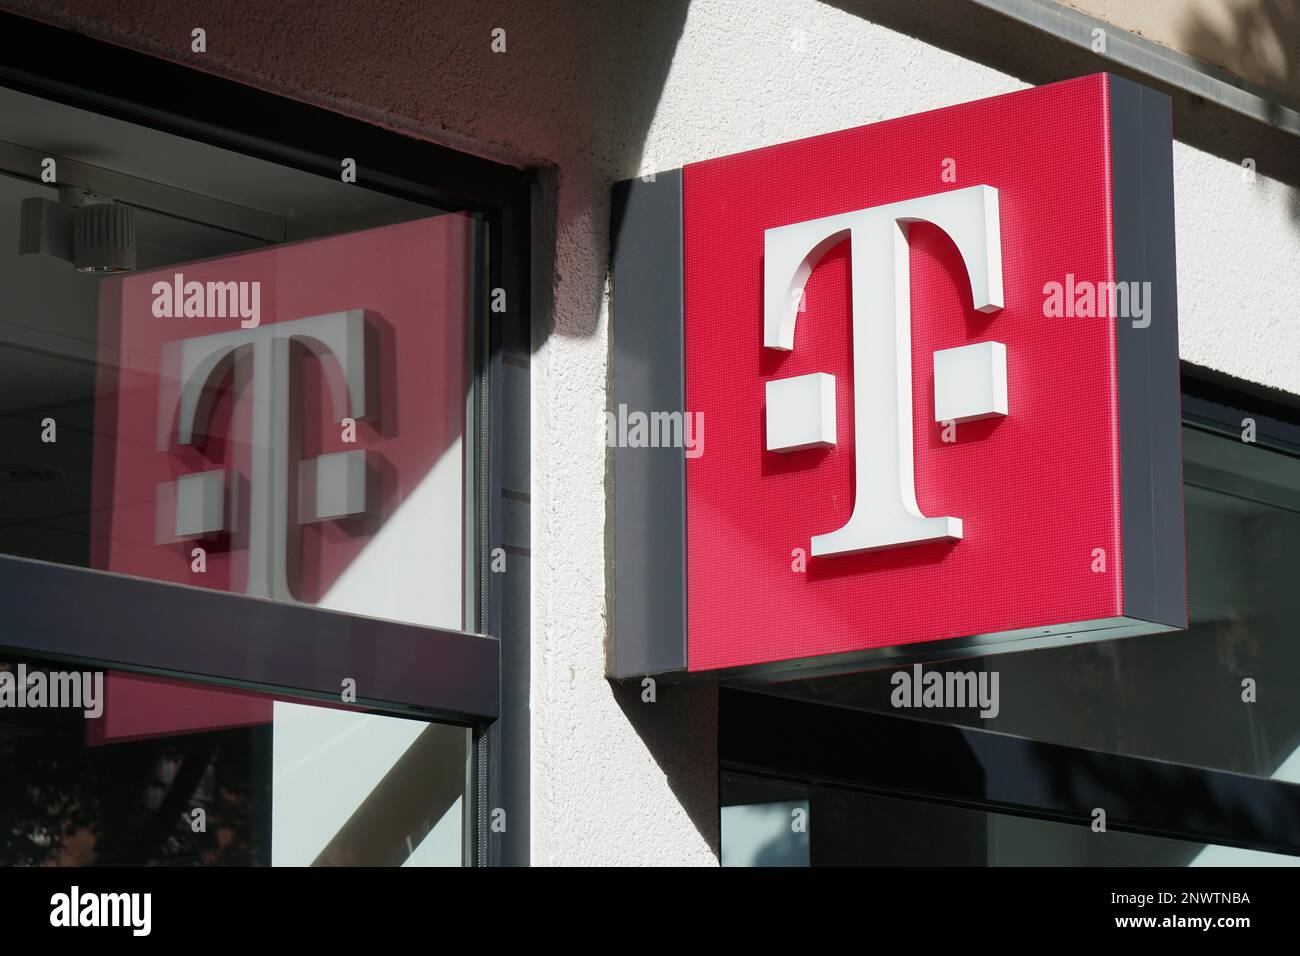 Hannover, Germany - October 8, 2017: T logo at German telecommunications company Telekom Deutschland chain store at Lister Meile Stock Photo